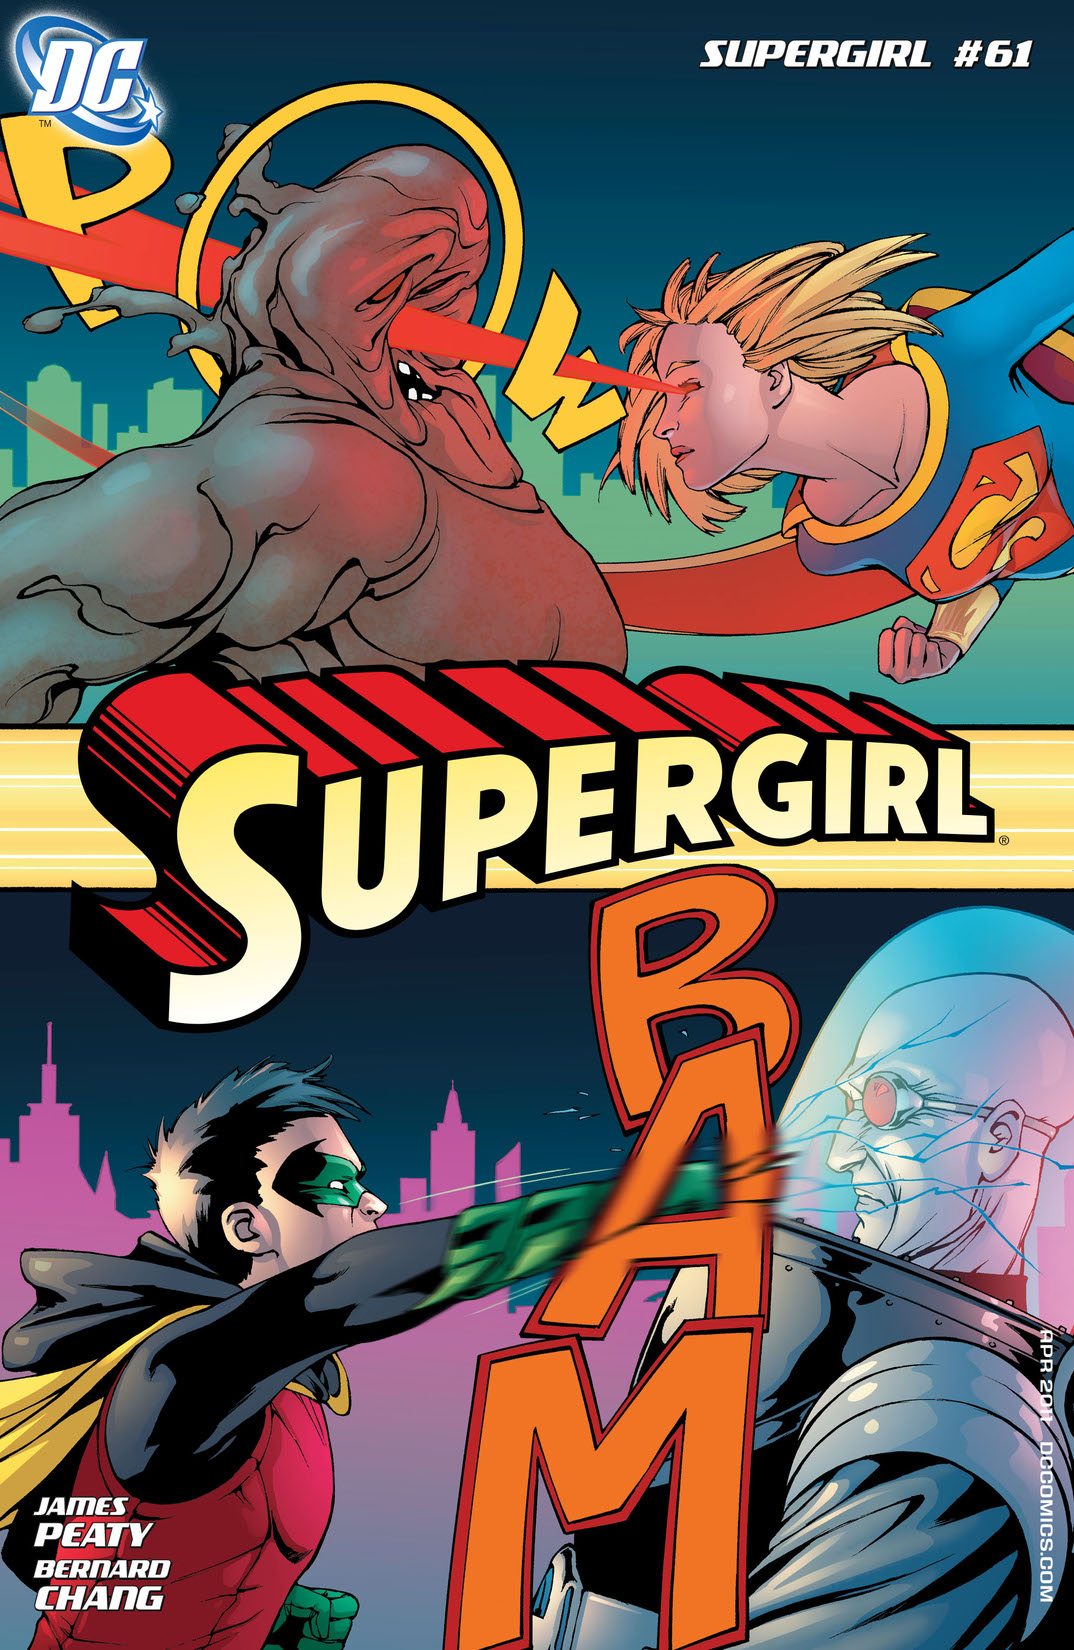 Supergirl (2005-) #61 preview images